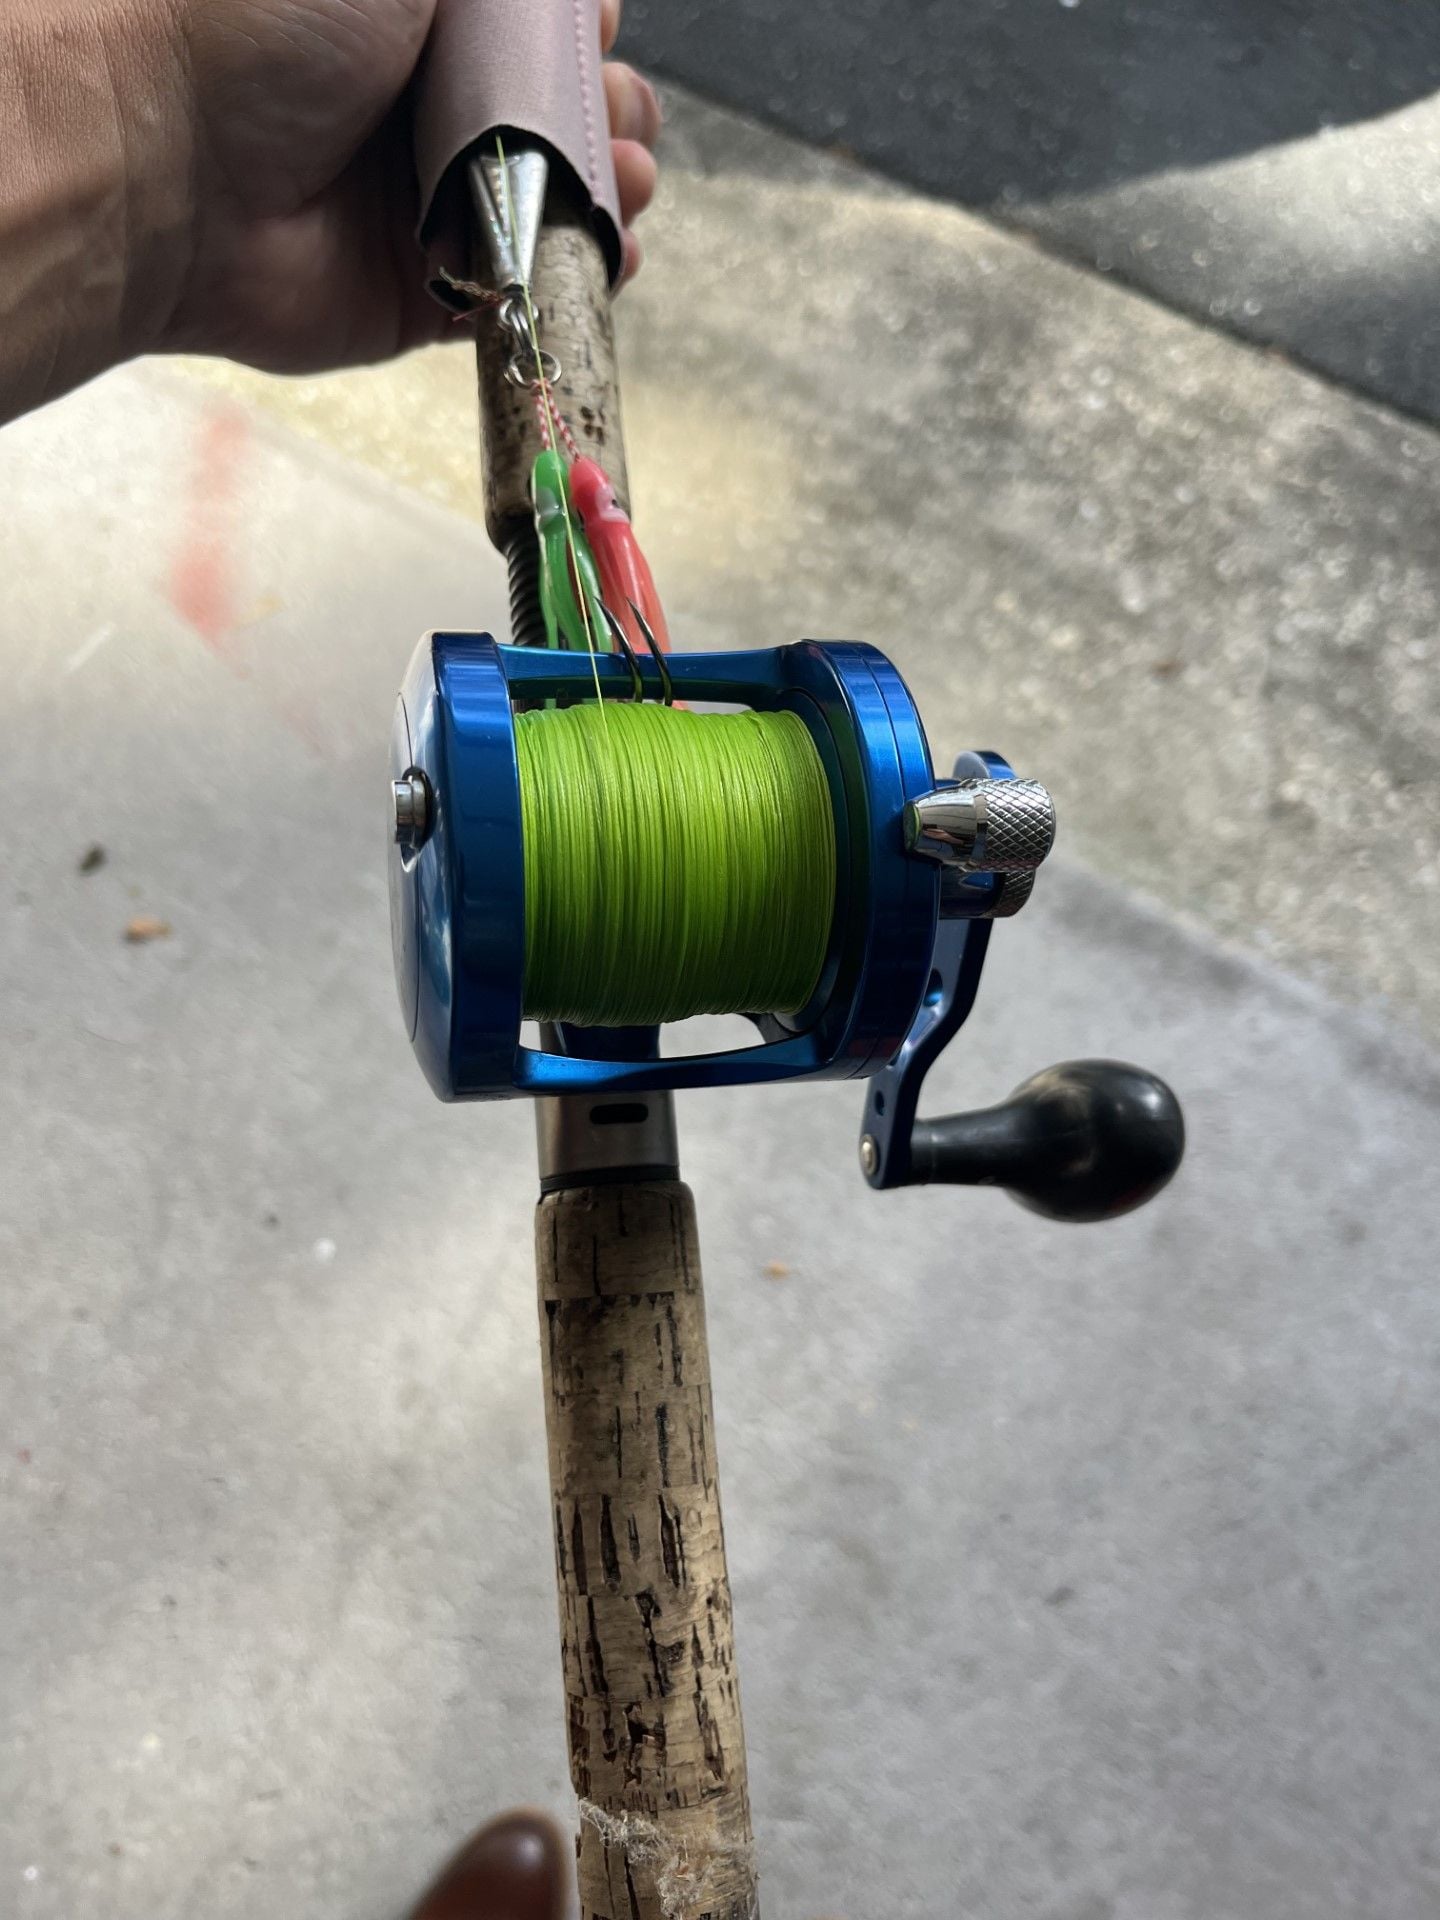 Used Reels for sale - The Hull Truth - Boating and Fishing Forum